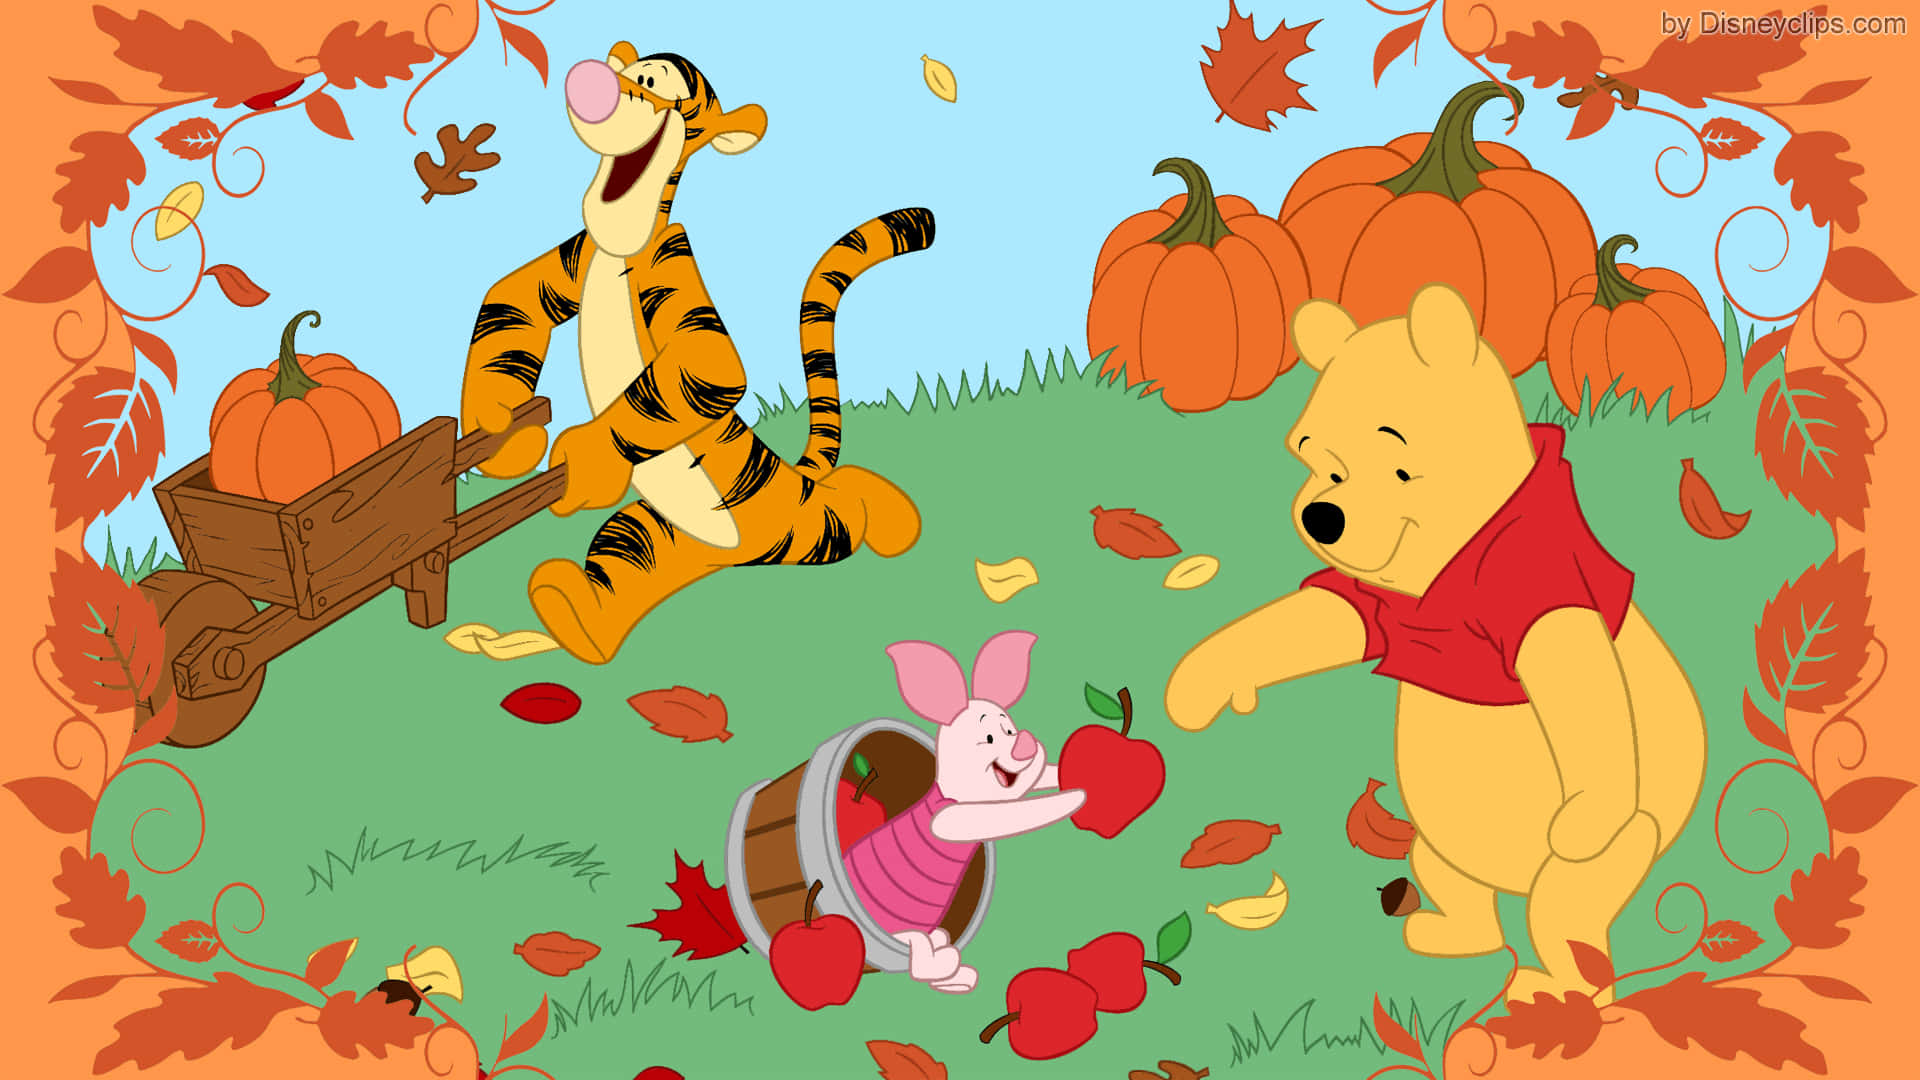 Celebrate The Adventures Of Winnie The Pooh